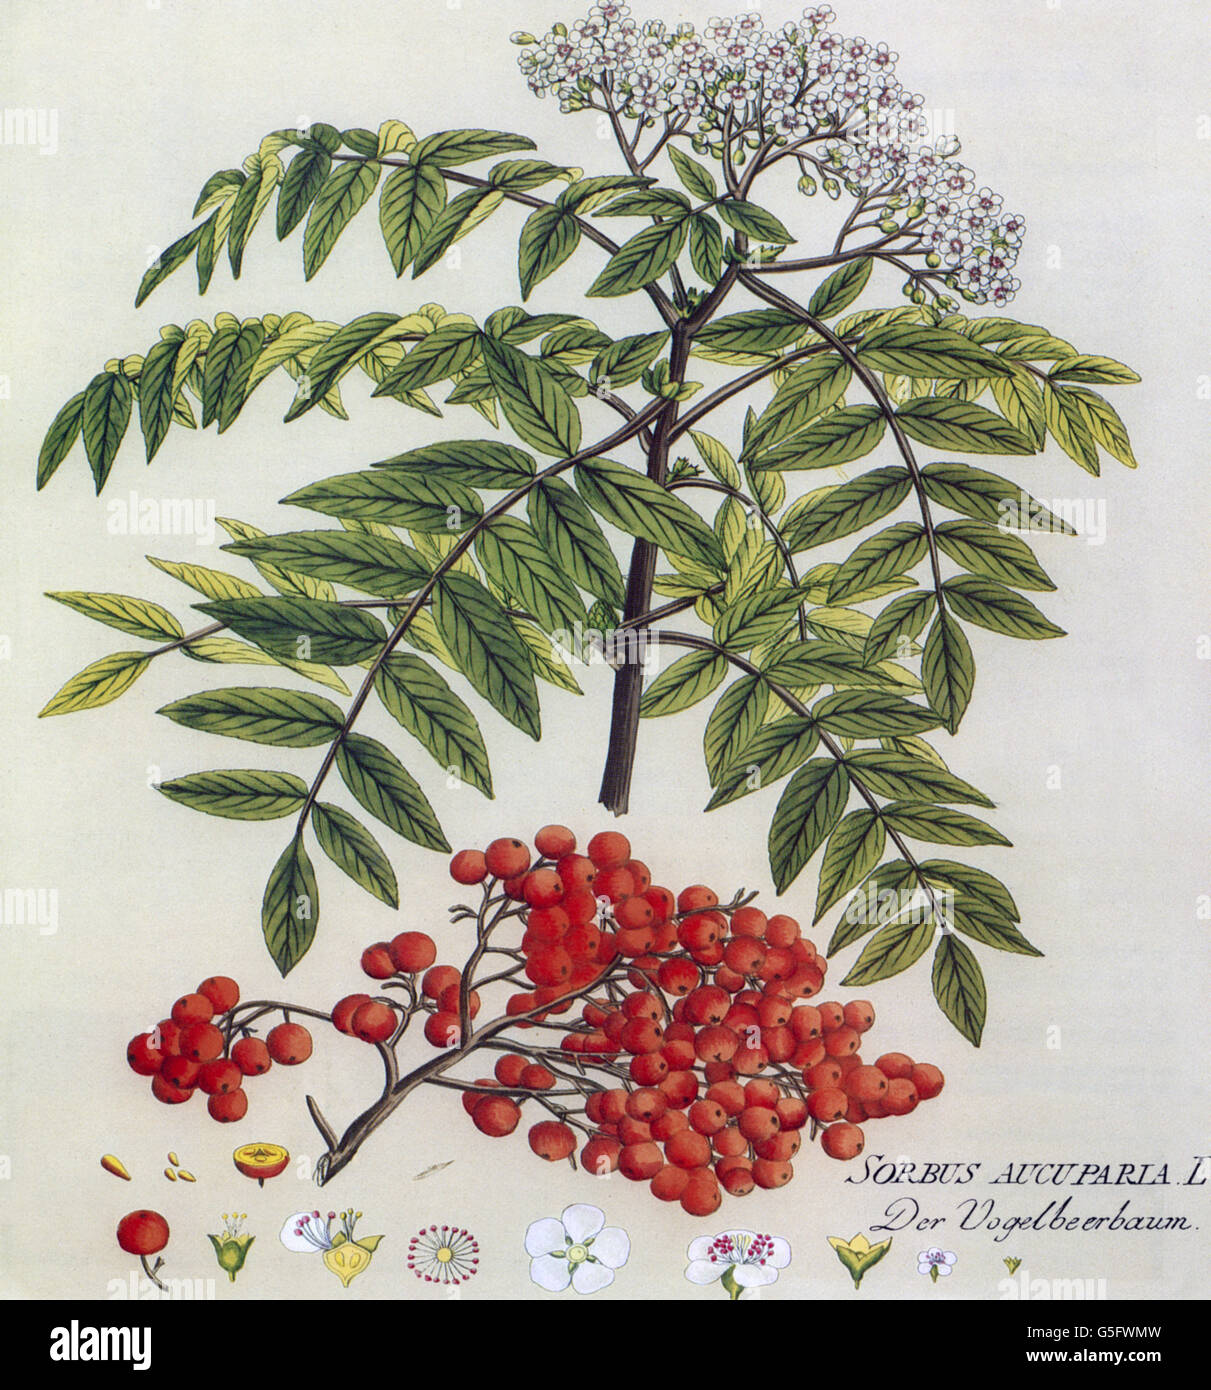 botany, trees, mountain ash (Sorbus aucuparia L.), blossoms, leaves, fruit, coloured engraving, 19th century, rowan berry, rowan berries, forage plant, Rosaceae, medicinal plant, blossom, leaf, plant, plants, historic, historical, Additional-Rights-Clearences-Not Available Stock Photo